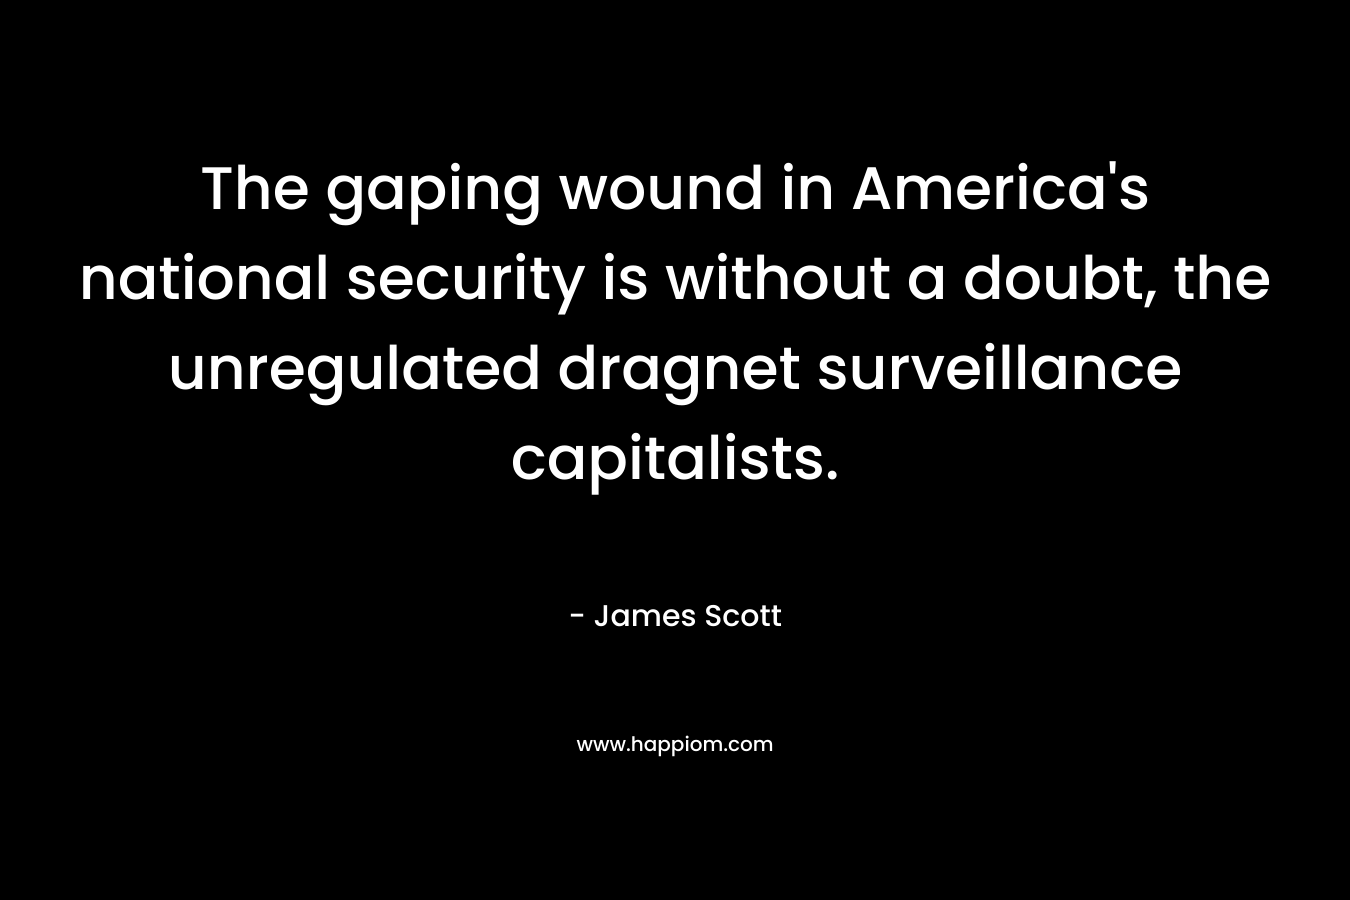 The gaping wound in America's national security is without a doubt, the unregulated dragnet surveillance capitalists.